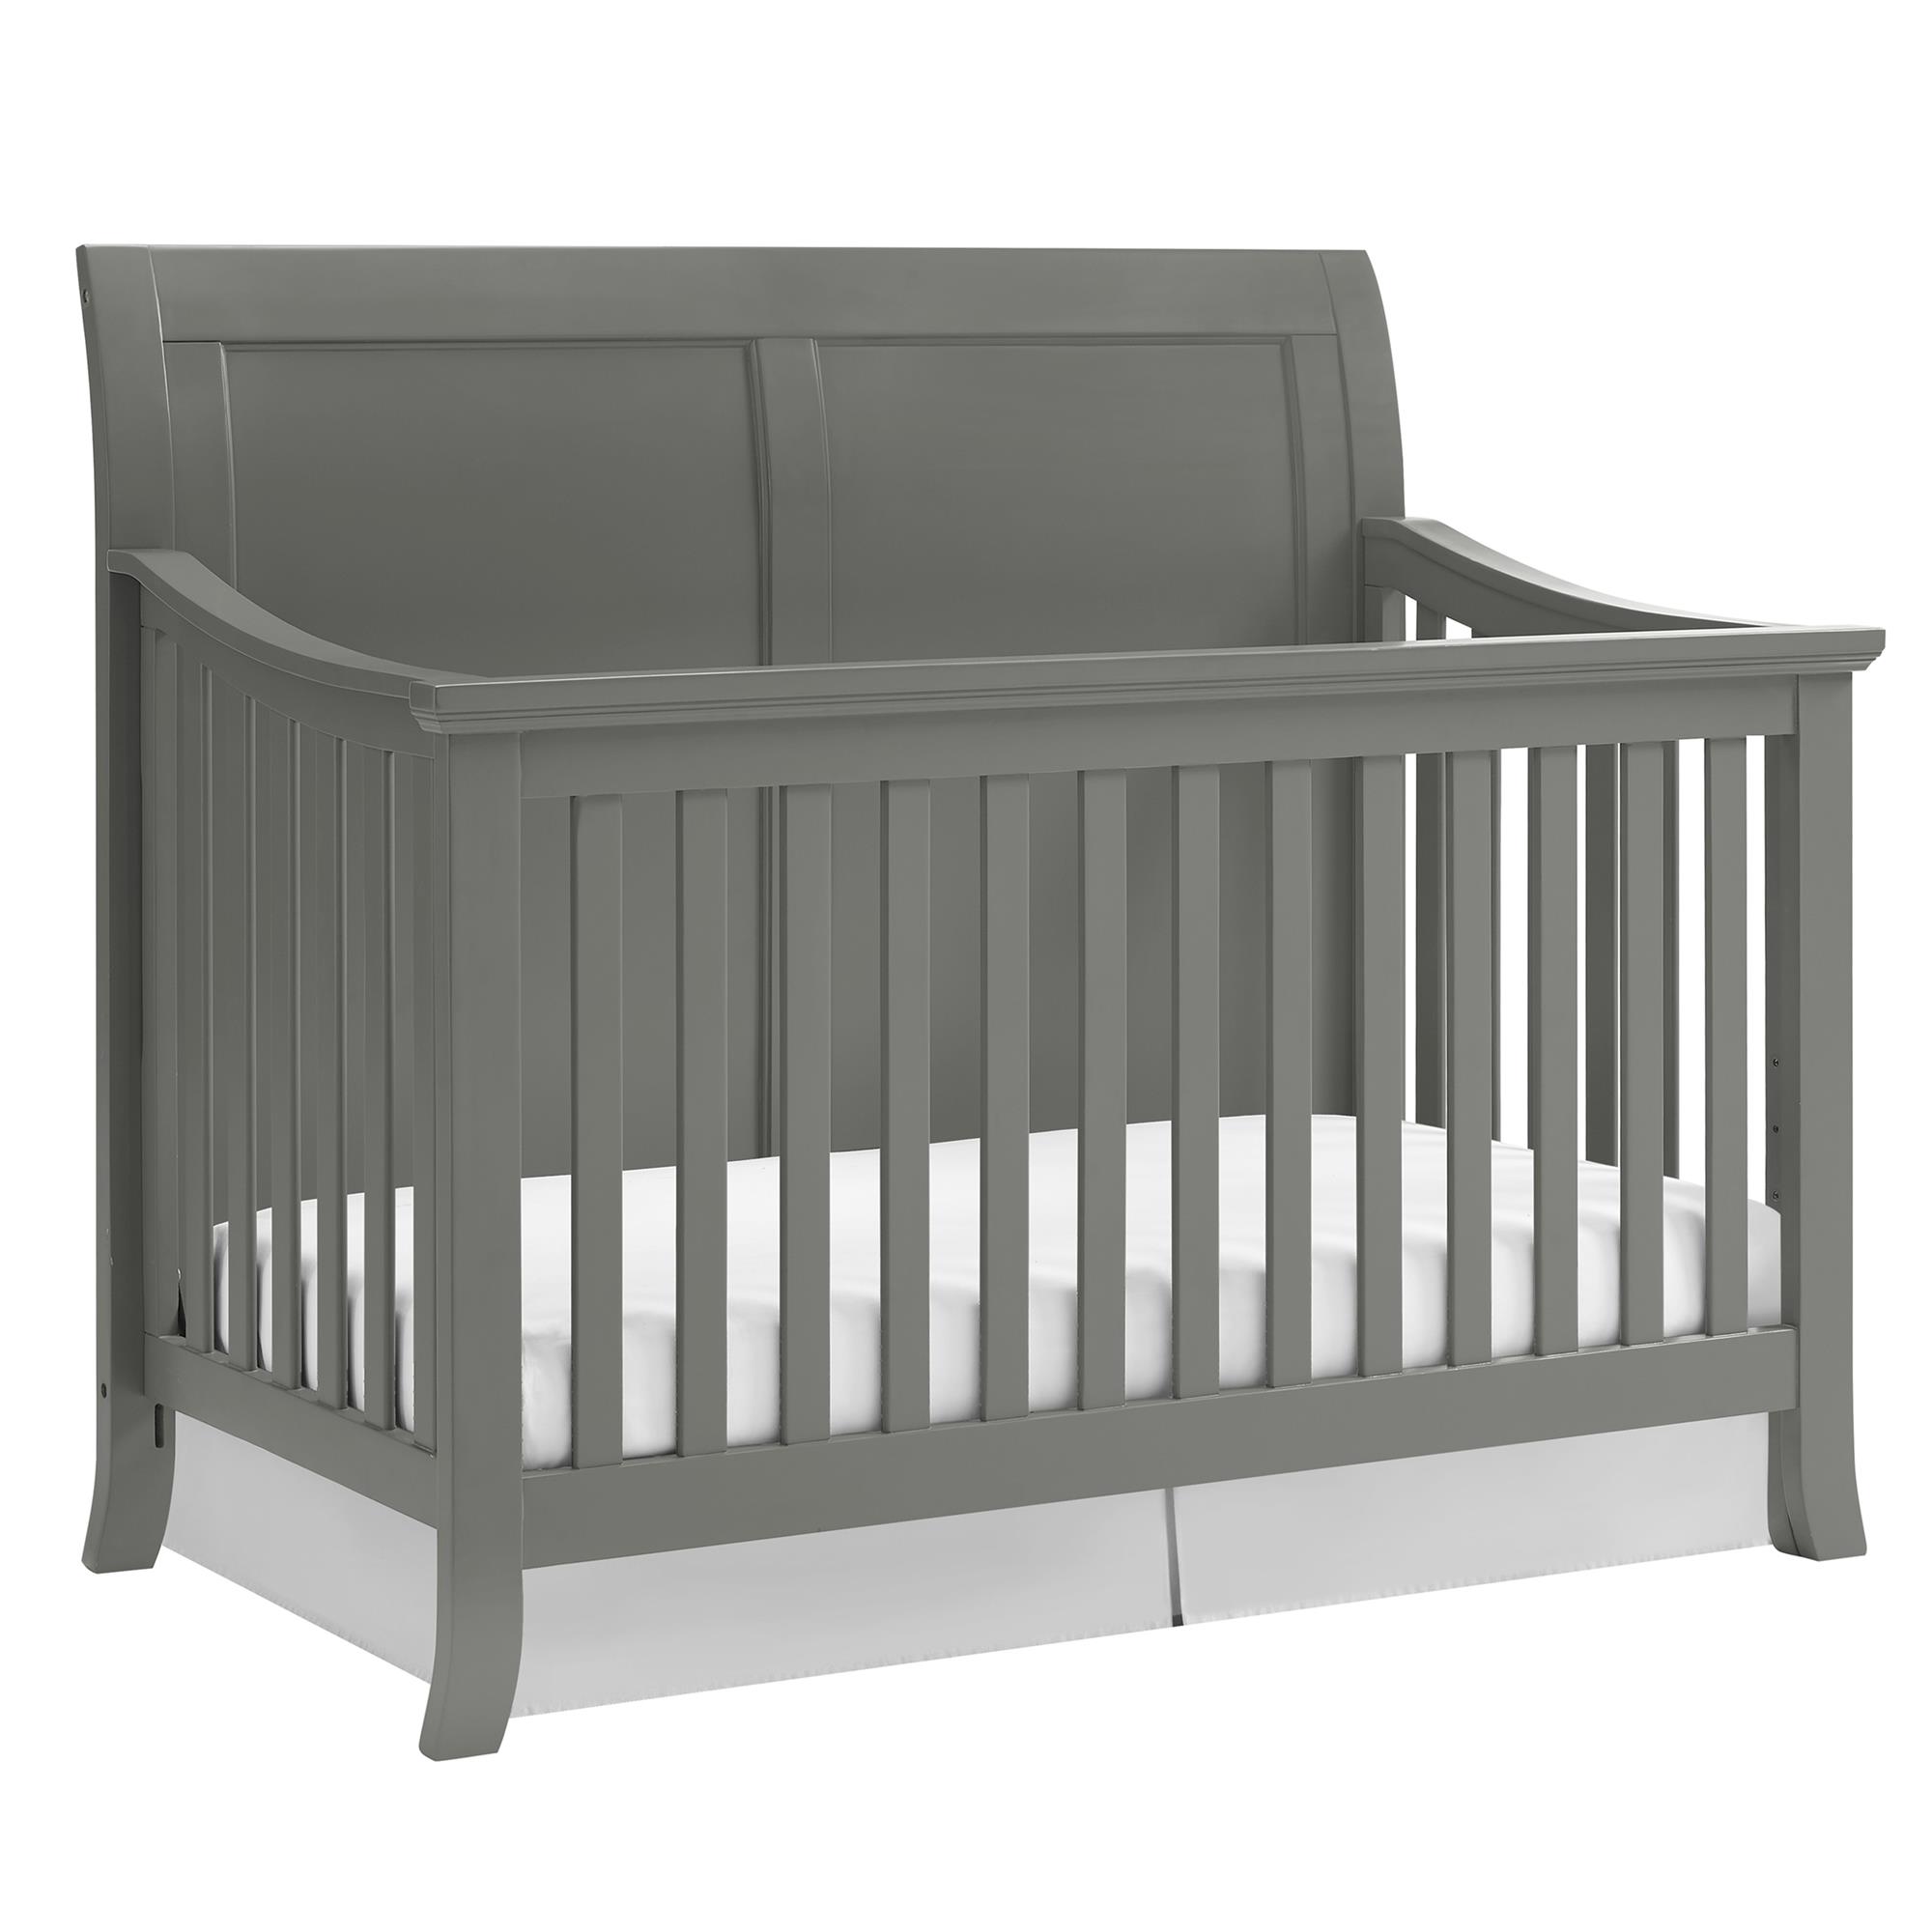 Baby Relax Hollis 4-in-1 Convertible Crib